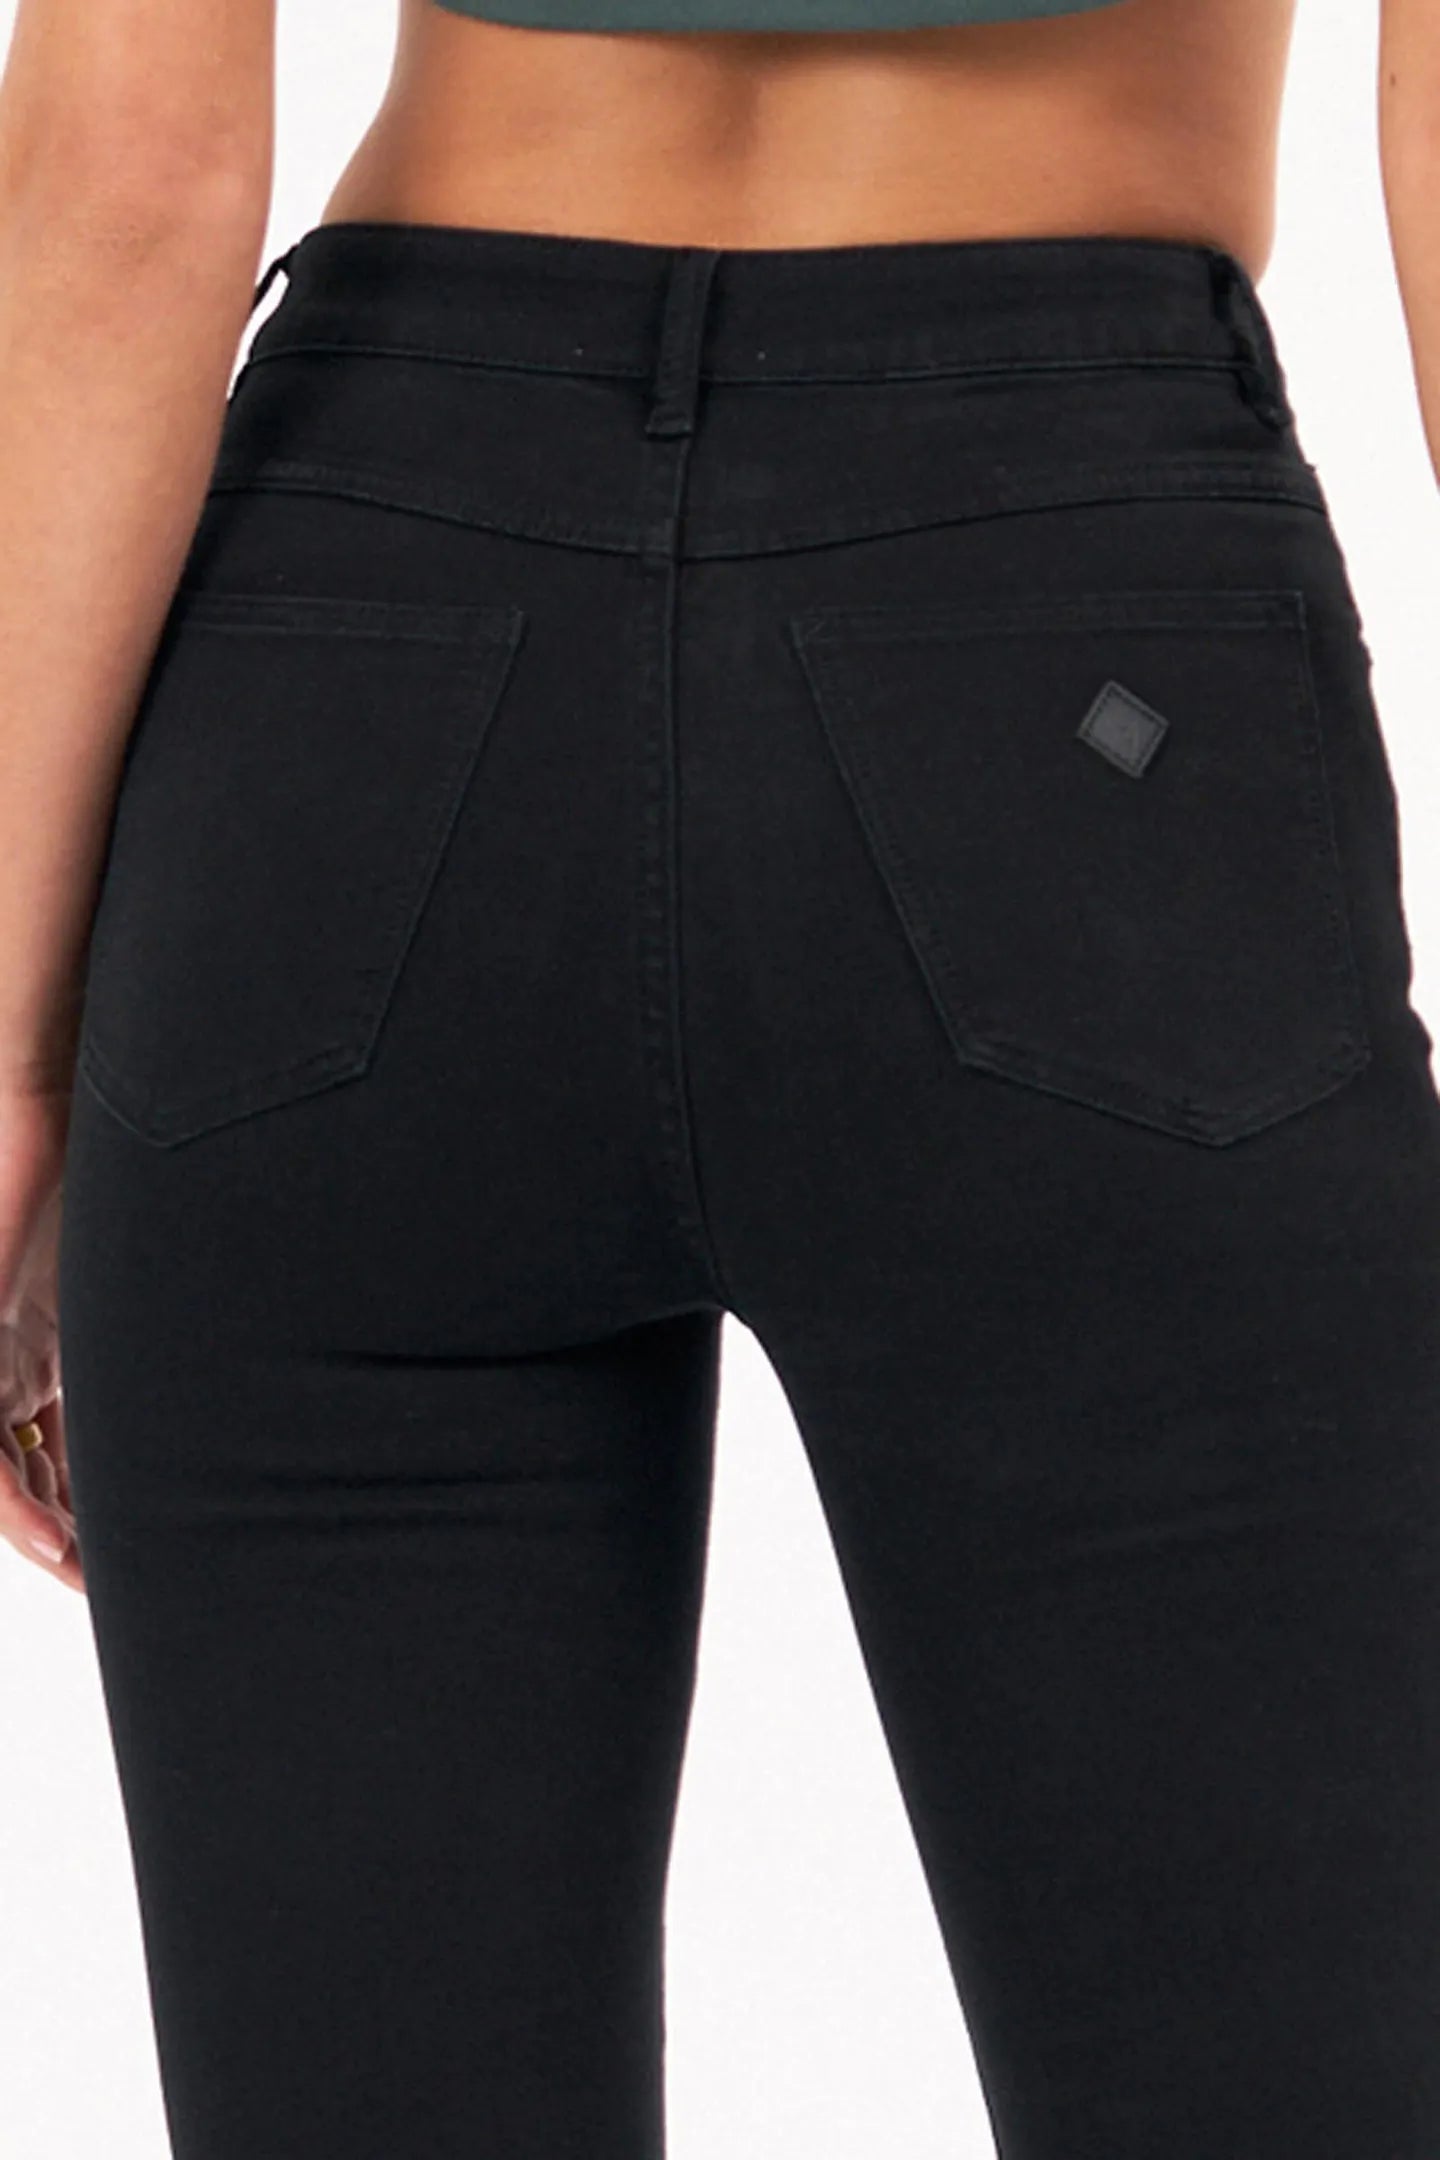 The A High Skinny Ankle Basher in Black Magic by ABRAND is a high rise, skinny leg jean, made with a super stretch denim, This fits true to size